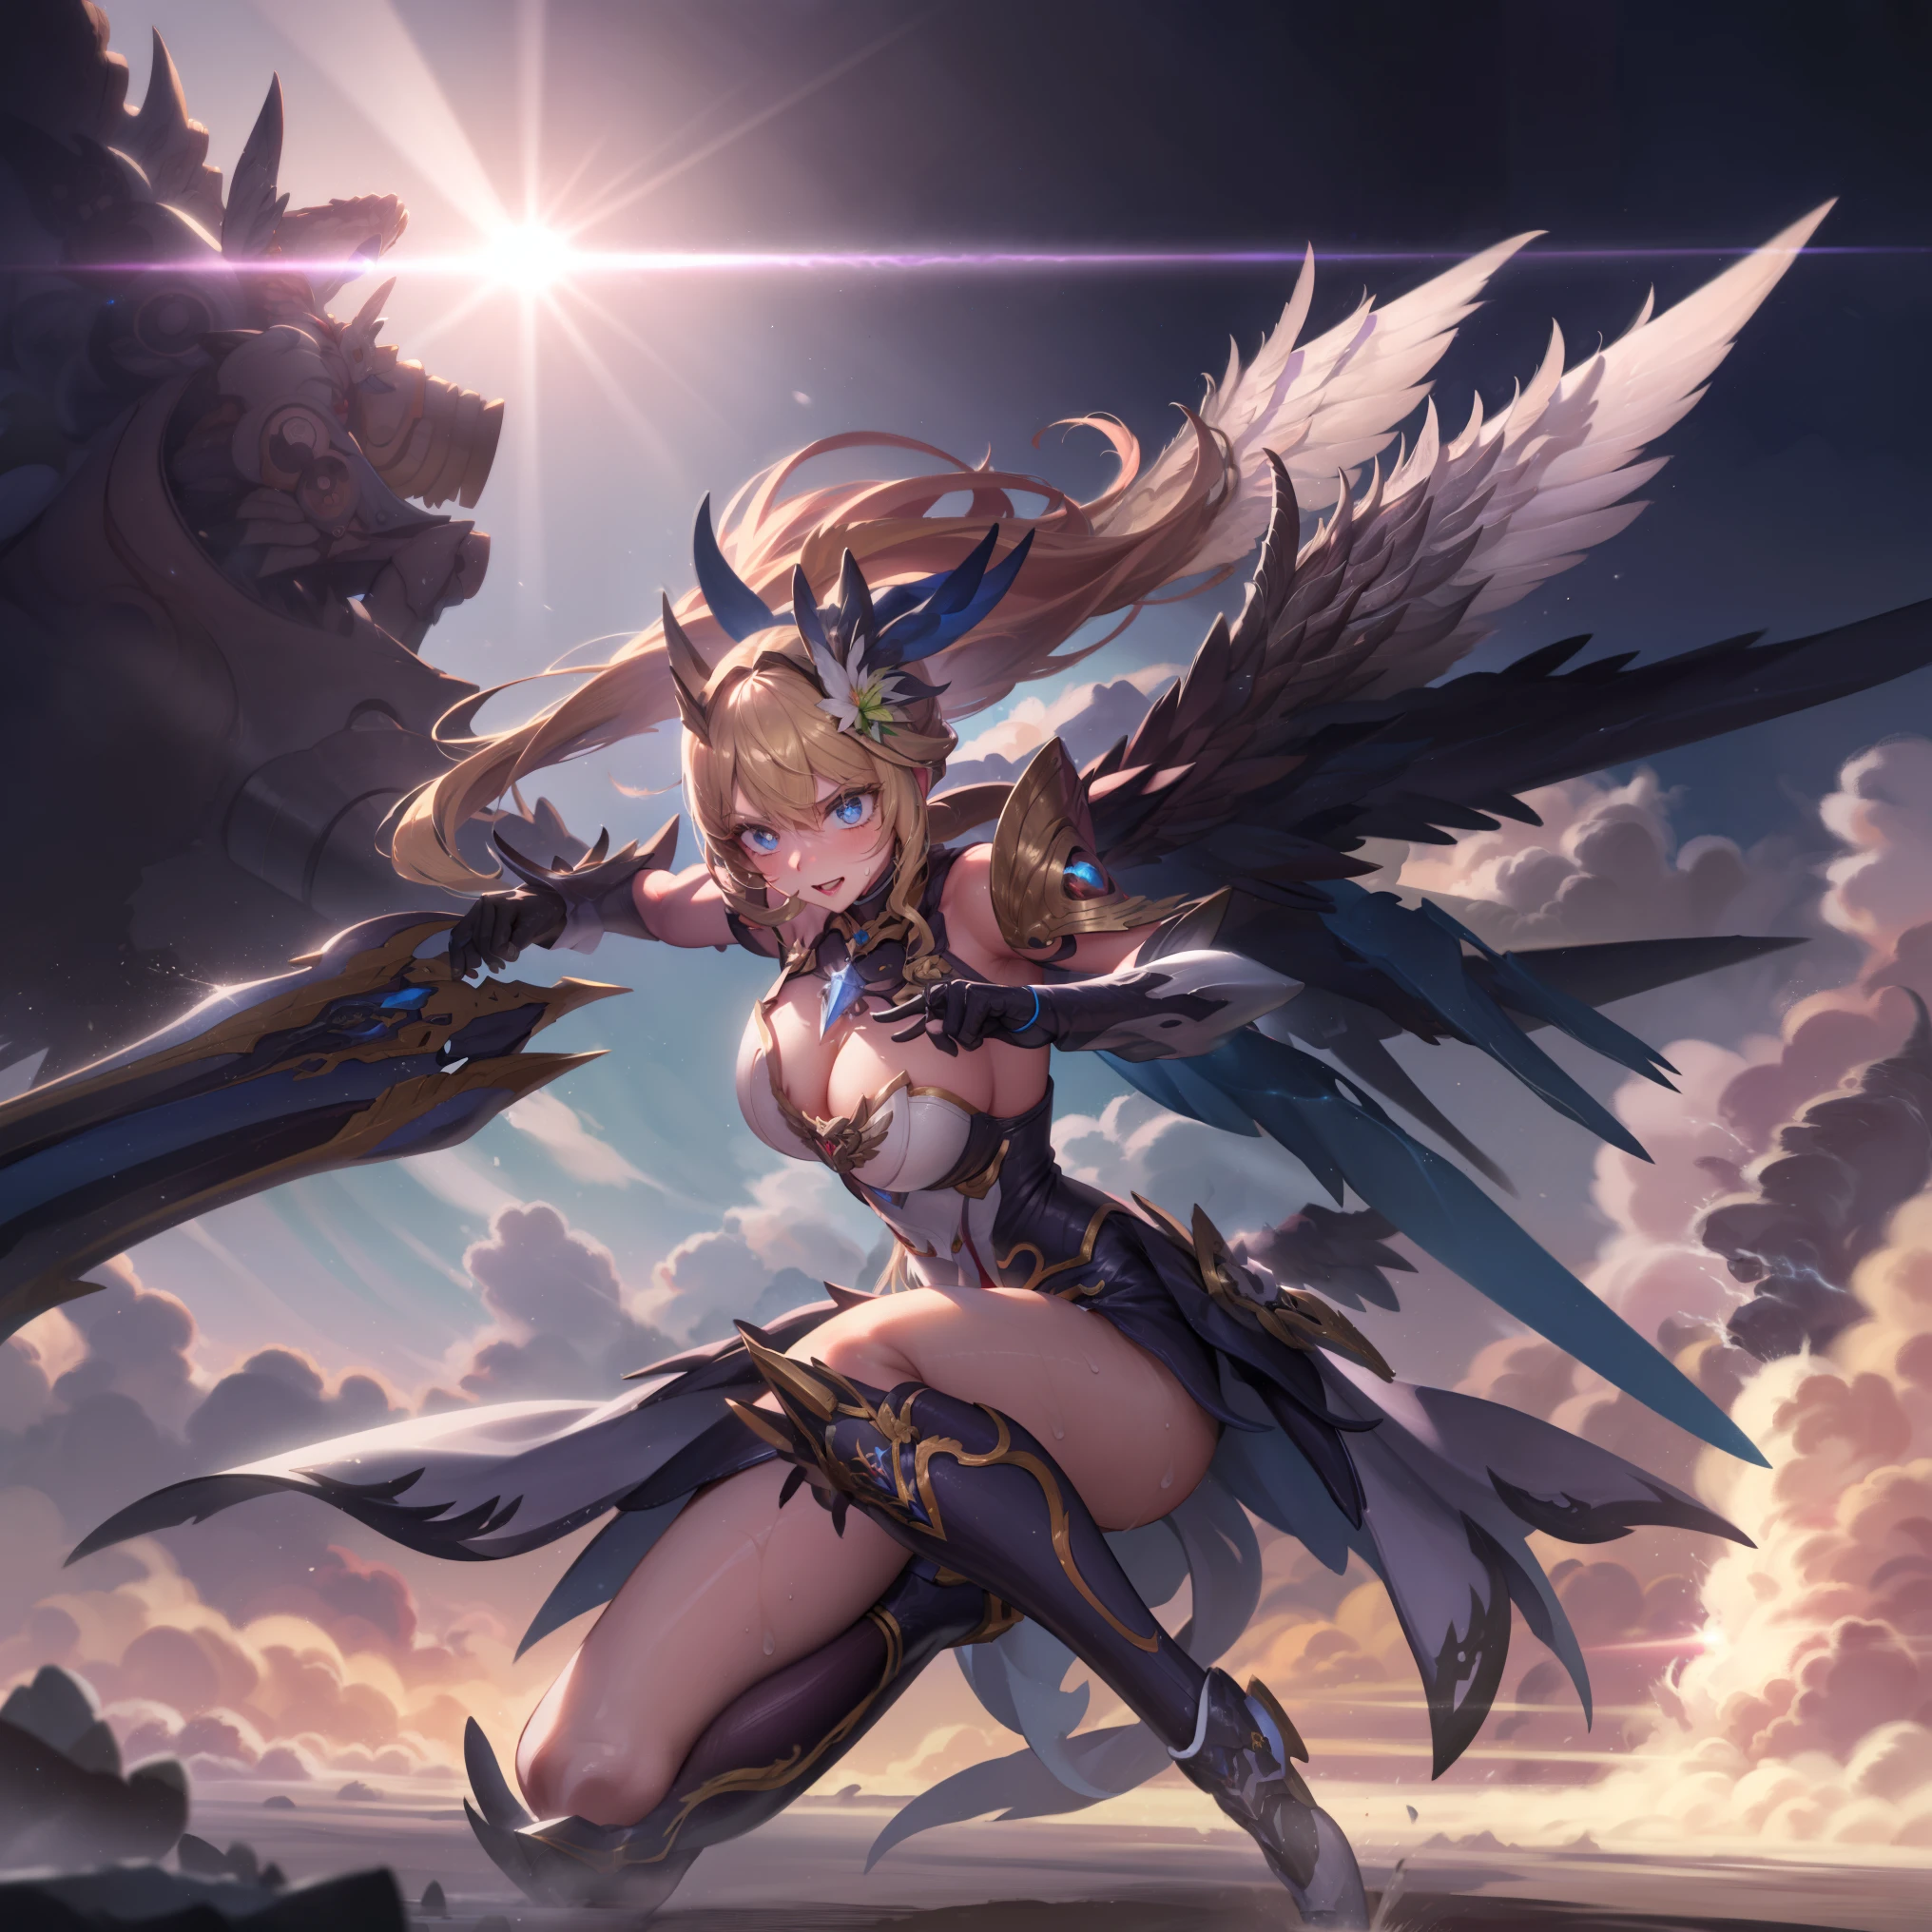 combat mecha，（blonde girl），(huge ponytail),shining blue eyes，blue light energy long sword，Milky Way，mechanical and sophisticated，（（blonde beauty））public detailecha wings，elegant，blue mecha，blue shining eyes，（stocking heels），land，mechanical and sophisticated，public detailecha wings，elegant，I have hands and feet，diagonal，diagonal，Hugeness，wind，It&#39;s hazy，Mecha&#39;s eyes glow blue，blue mecha，blue shining eyes，Holding a sword of delicate light energy，zero，mechanical and sophisticated，public details，Huge mecha wings，elegant，wood々，I have hands and feet，diagonal，diagonal，Hugeness，baiyun，It&#39;s hazy，Mecha&#39;s eyes glow blue，public details，winds of the future，sacred，cavalier，combat mecha，shining blue eyes，blue delicate sniper rifle，zero，mechanical and sophisticated，public details，Huge mecha wings，elegant，wood々，I have hands and feet，diagonal，diagonal，Hugeness，baiyun，It&#39;s hazy，Mecha&#39;s eyes glow blue，public details，winds of the future，sacred，cavalier，face is clear，face wearing mask armor，master painting，best quality，official art，Very detailed CG Unity 8K 壁紙，brighter light，（particles of light，（figure）（Farbe）good looking，Impeccable，（（graphic painting）），（heavier stroke）），（thick line），best image quality，master painting，filigree，long eyelashes，（（（silhouette））），Very detailed background，tulip，banana leaf，lily，dew，date palm flower，Ryu，pale white off shoulder dore sotho sunlight，（people々close-up of），（A large amount of sweat drips all over the body）（（超highest quality））， （（Very masterpiece））， （（super detail：1.4））， （（Surreal realistic 3D））， dragon warrior girl， Machine body， Dynamic action poses in battle scenes， Very complex and heavy fighter mechanical weapons， 緻密でcomplexスチームパンクと緻密なゴスロリを融合させたオフショルダーファッション， complexスチームパンクのヘッドギア， Very thin long mechanical boots above the knee， Fluttering lace flare mini skirt， Beautiful upward facing big breasts，somewhat long, windになびく縦巻きの銀髪，Countless large shining spheres fly around，Many sparks intersect and fly，Countless neon signs rained down from the gesture that evoked magic.，Steampunk Factory，complex and precise mechanical ruins，very dark night background，very dramatic and cinematic lighting。1people girl、night city、rain、kimono without sleeves、black haired、has a bloody weapon、look at the camera、Cherry blossoms are dancing，unusually resistant、blush、looks like it&#39;s in pain、shrine maiden、Valkyrie、Angel wings、belly button、side boob barbosa、complex、particles of light、thighs thighs thighs、shiny skin、perfect lighting、1people girl、looking at the viewer、winged hat、pelvic curtain、A smilee、(masterpiece)、(highest quality)、very huge breasts、porcelain skin、very long hair、wavy hair、royal sister，woman，Queen，wear a crown，周りには金Farbeの稲妻がたくさんあります，sitting on the throne，bangs cover eyes，black suspender socks，black lace top，，high jump，grab Arlan&#39;s leg，，black silk top，Married woman，mother&#39;s，domineering，smile，the corners of the mouth are raised，red and gold eyes，black silk erotic underwear，black top，black silk gloves，I have a gorse tattoo on my chest and thigh.，腕には金Farbeの龍の鱗がたくさんある，首には金Farbeの龍の鱗がたくさんある，bright eyes，dragon eyes，Snake eye，erect pupils，服には金Farbeの縞模様がある，服には金Farbeの模様がある，靴下には金Farbeの模様が入っています，Tall people，bring out the outside of the chest，Twisted blade hanging from shoulder，big breasts ，Has long dragon horns，巨大な金Farbeの龍の翼，巨大な金Farbeの龍の翼，胴体ほどもある巨大な金Farbeの竜の翼，体は巨大な金Farbeの竜の翼で覆われている，golden eyes，just a pair of wings，big wings，the biggest dragon wing,the biggest dragon wing，首には金Farbeの鱗がある，Fingers are Golden dragon claws，Golden dragon&#39;s extended tail、1people girl、night city、rain、kimono without sleeves、black haired、has a bloody weapon、look at the camera、Cherry blossoms are dancing，Strongest quality, (very detailed: 1.5), table top, 超A high resolution,(photo-realistic:1.4), 1 beautiful girl, cowboy shot, (wear battle armor:1.4)